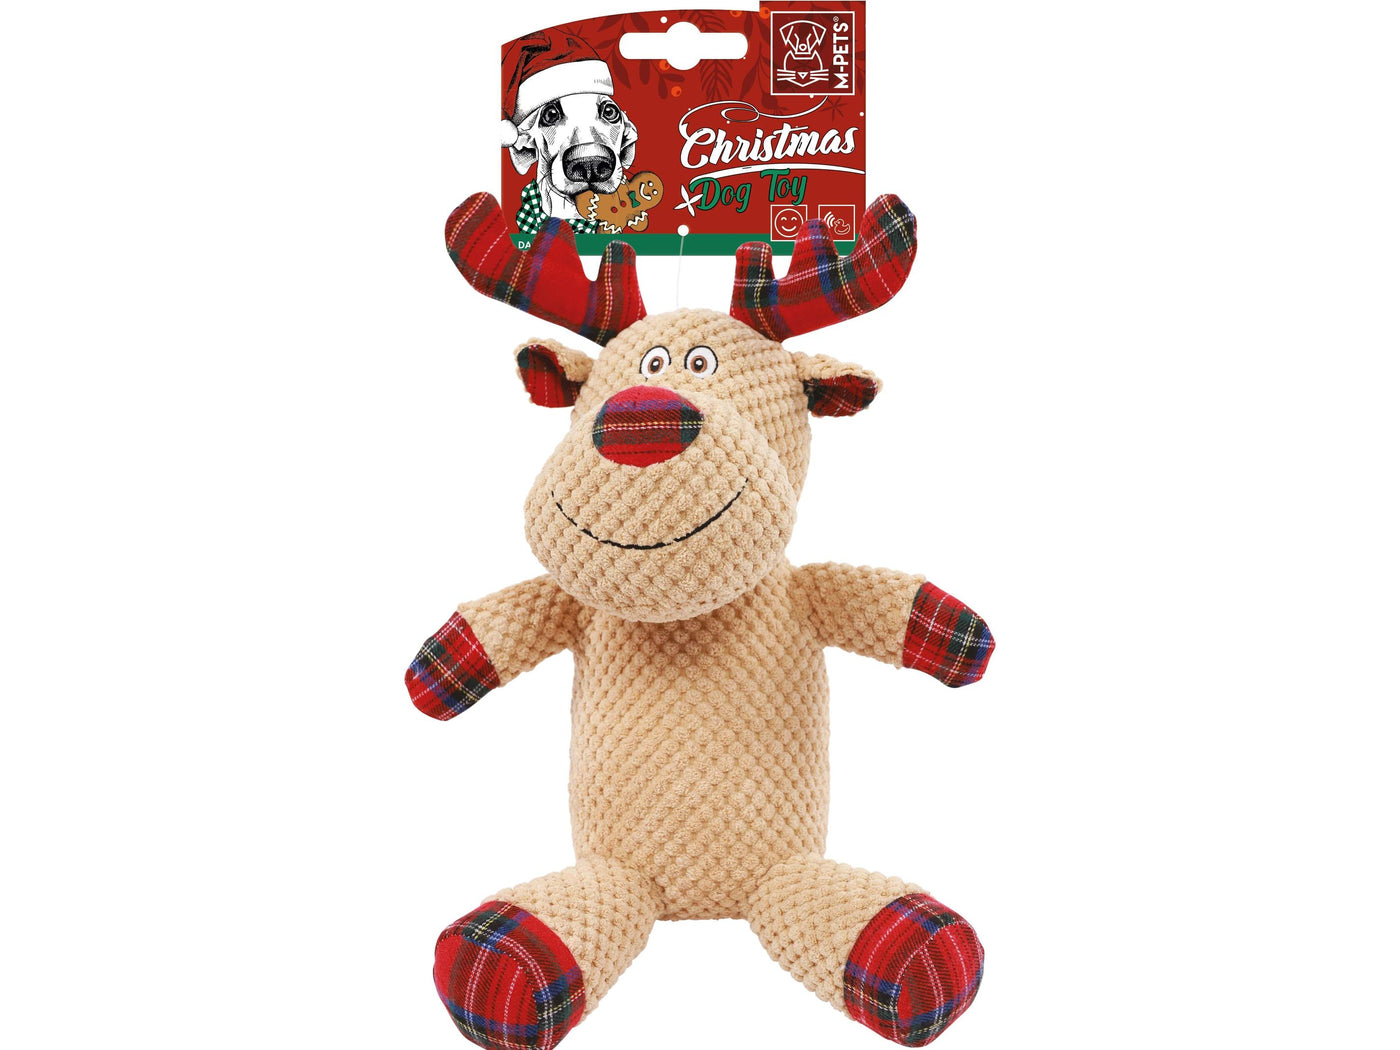 Christmas toy reindeer - DASHER Brown & Red